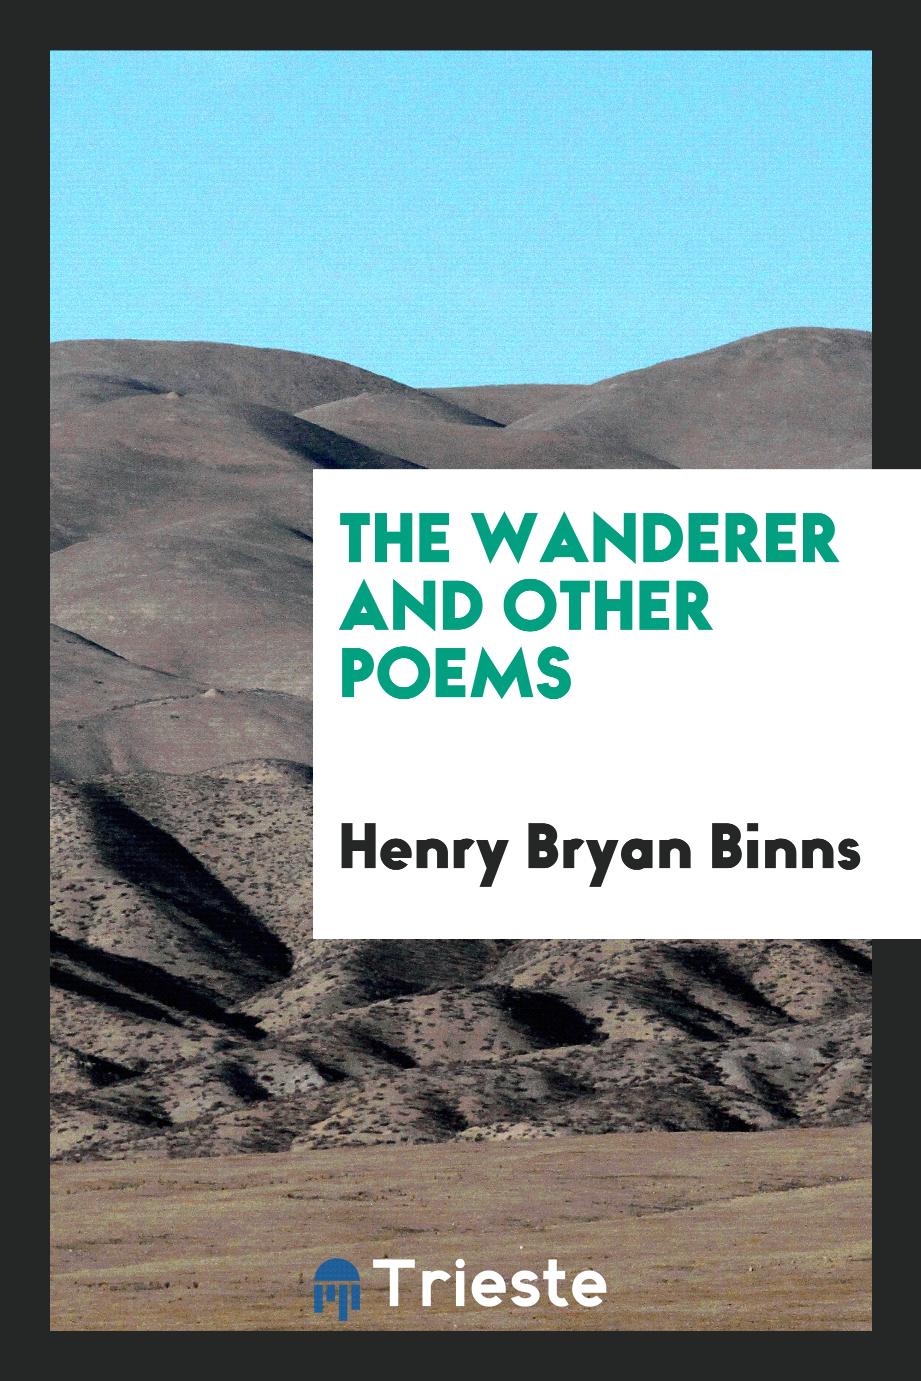 The wanderer and other poems